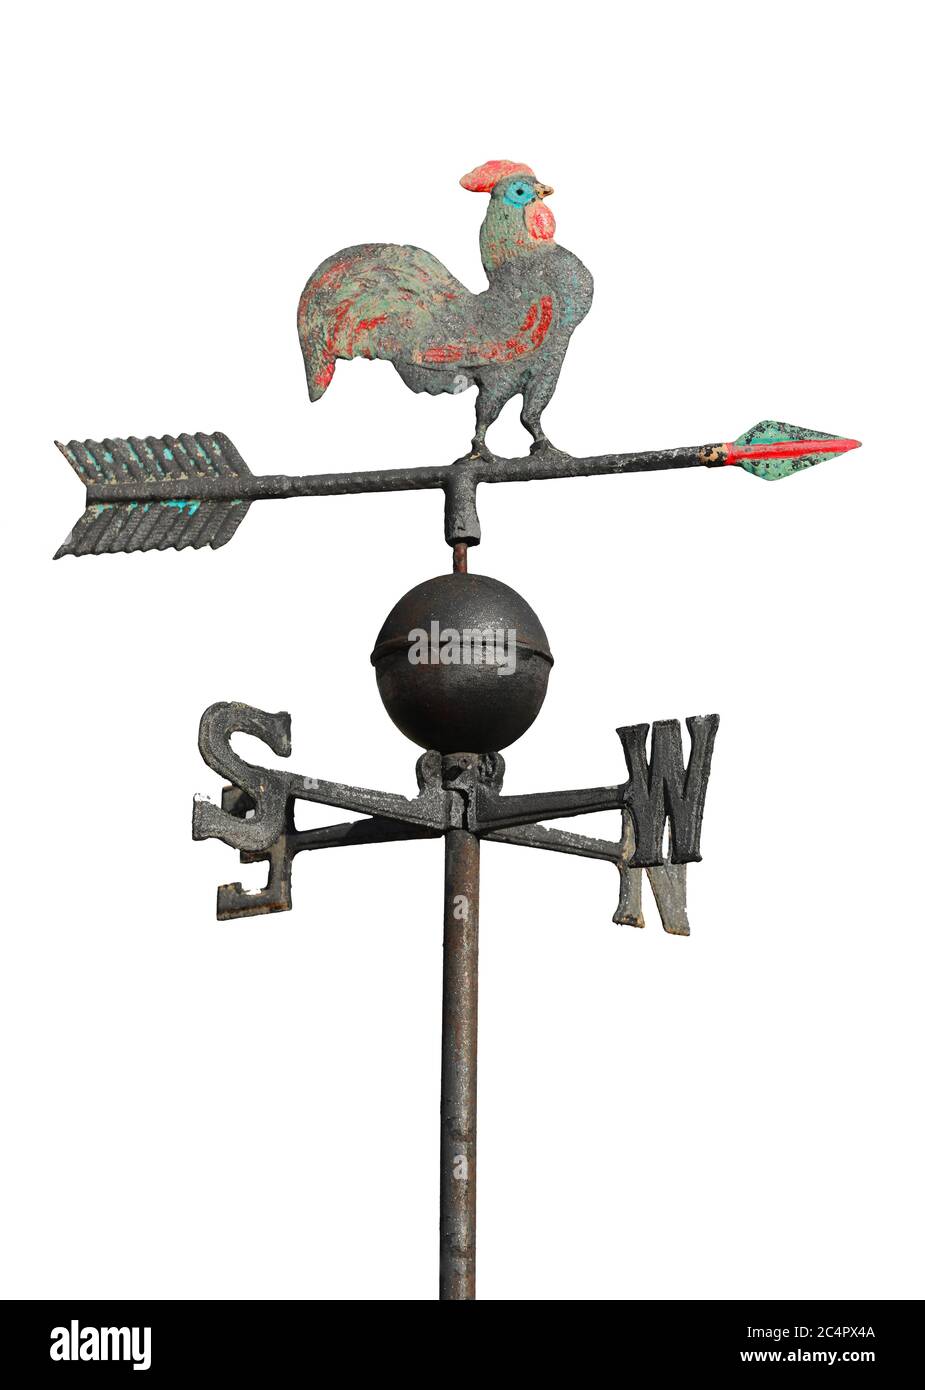 vintage wind vane to indicate the wind direction made of metal with a large  rooster on a white background Stock Photo - Alamy